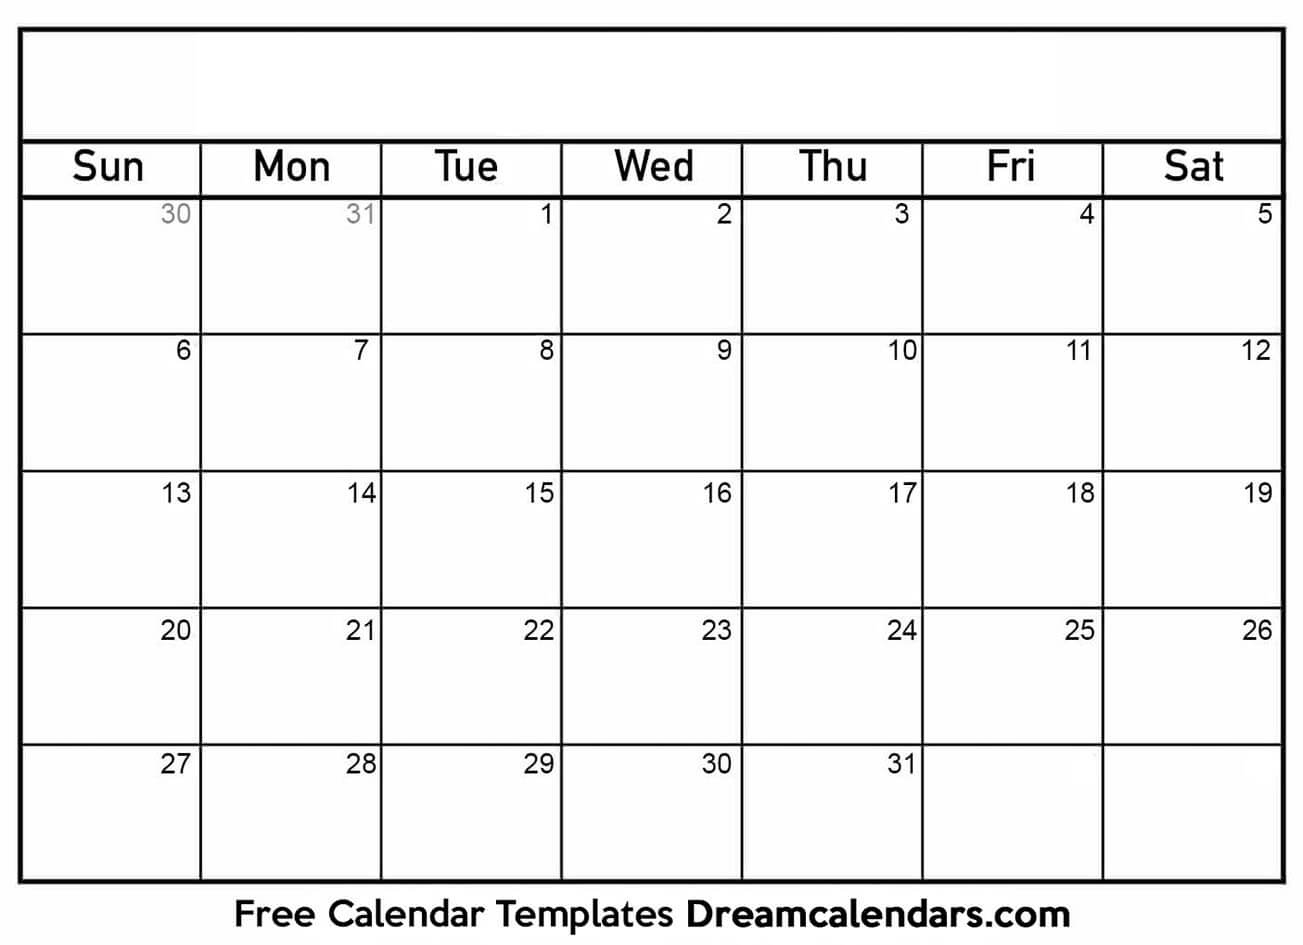 Printable Blank Calendar 2020 | Dream Calendars Blank Calendars With Days Of The Week Not Numbered